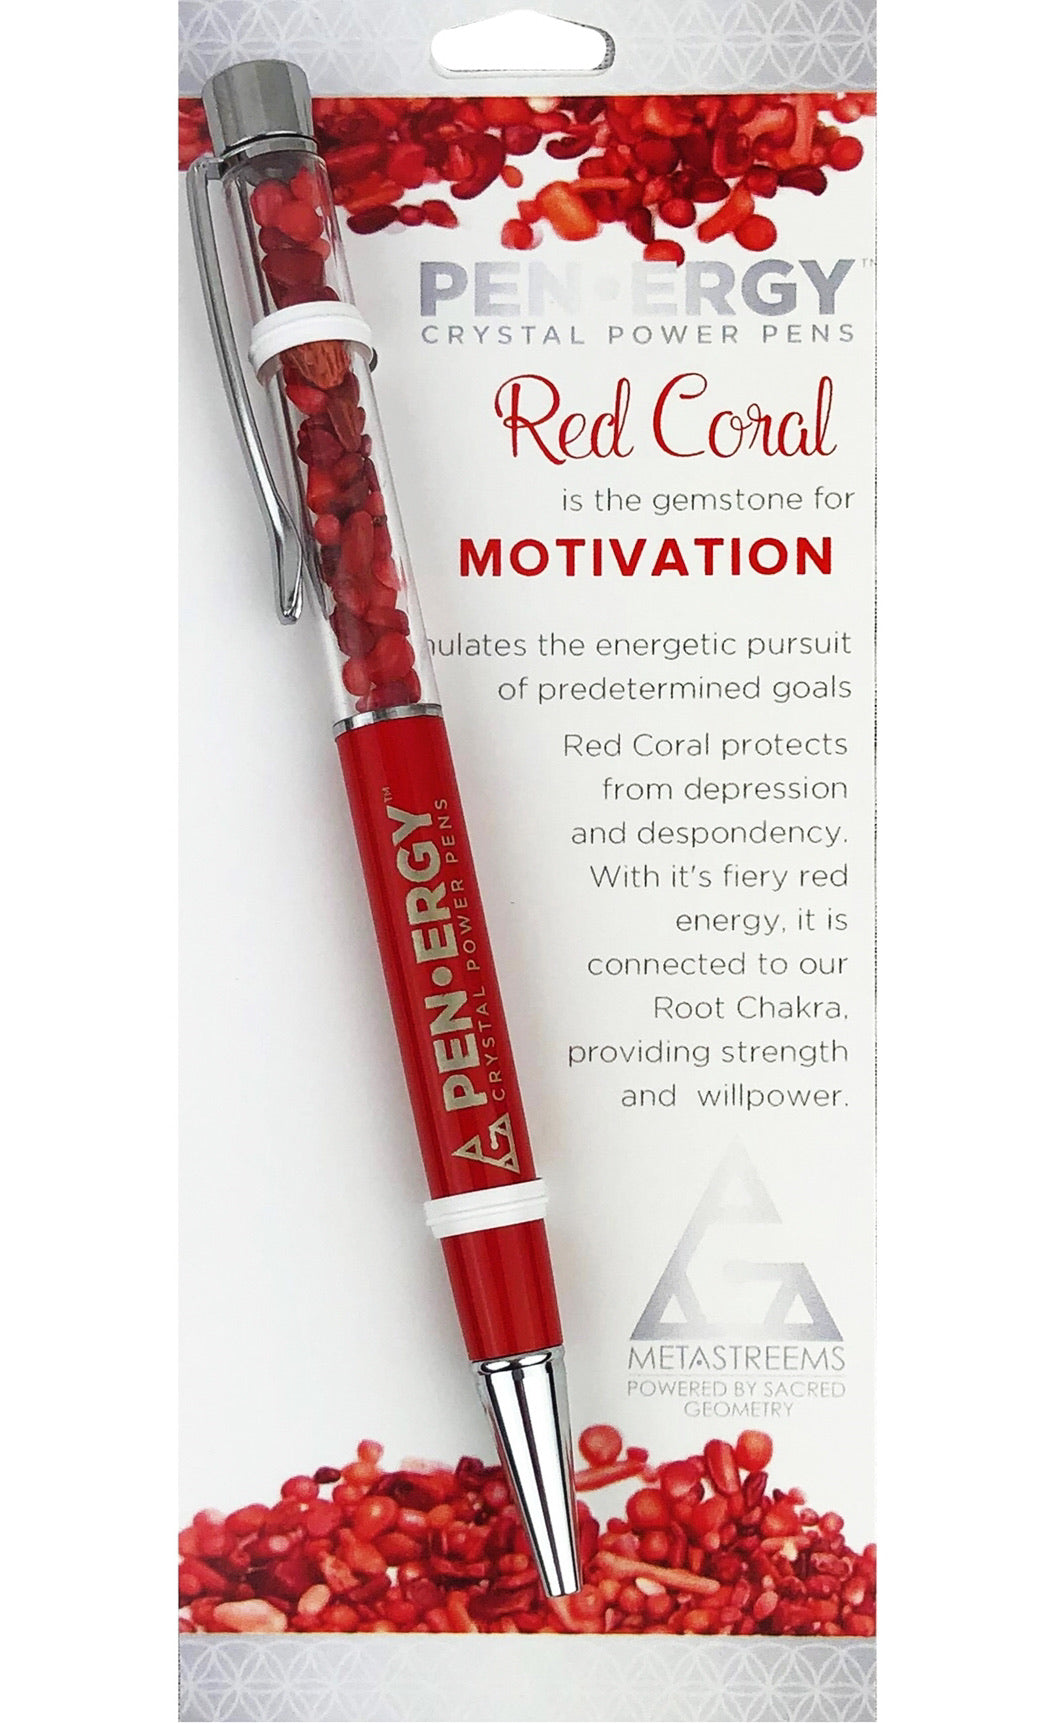 PEN-ERGY RED CORAL CRYSTAL PEN